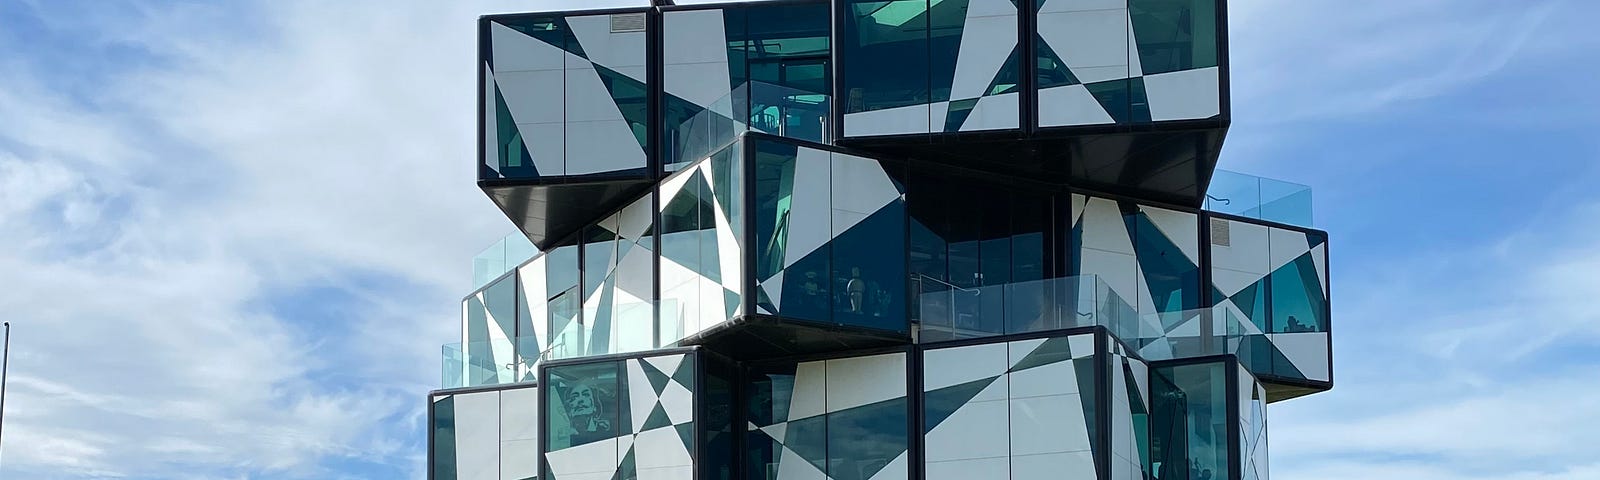 the D’Arenburg Cube — 5 storey geometric design, green and white, glass building in a vinyard